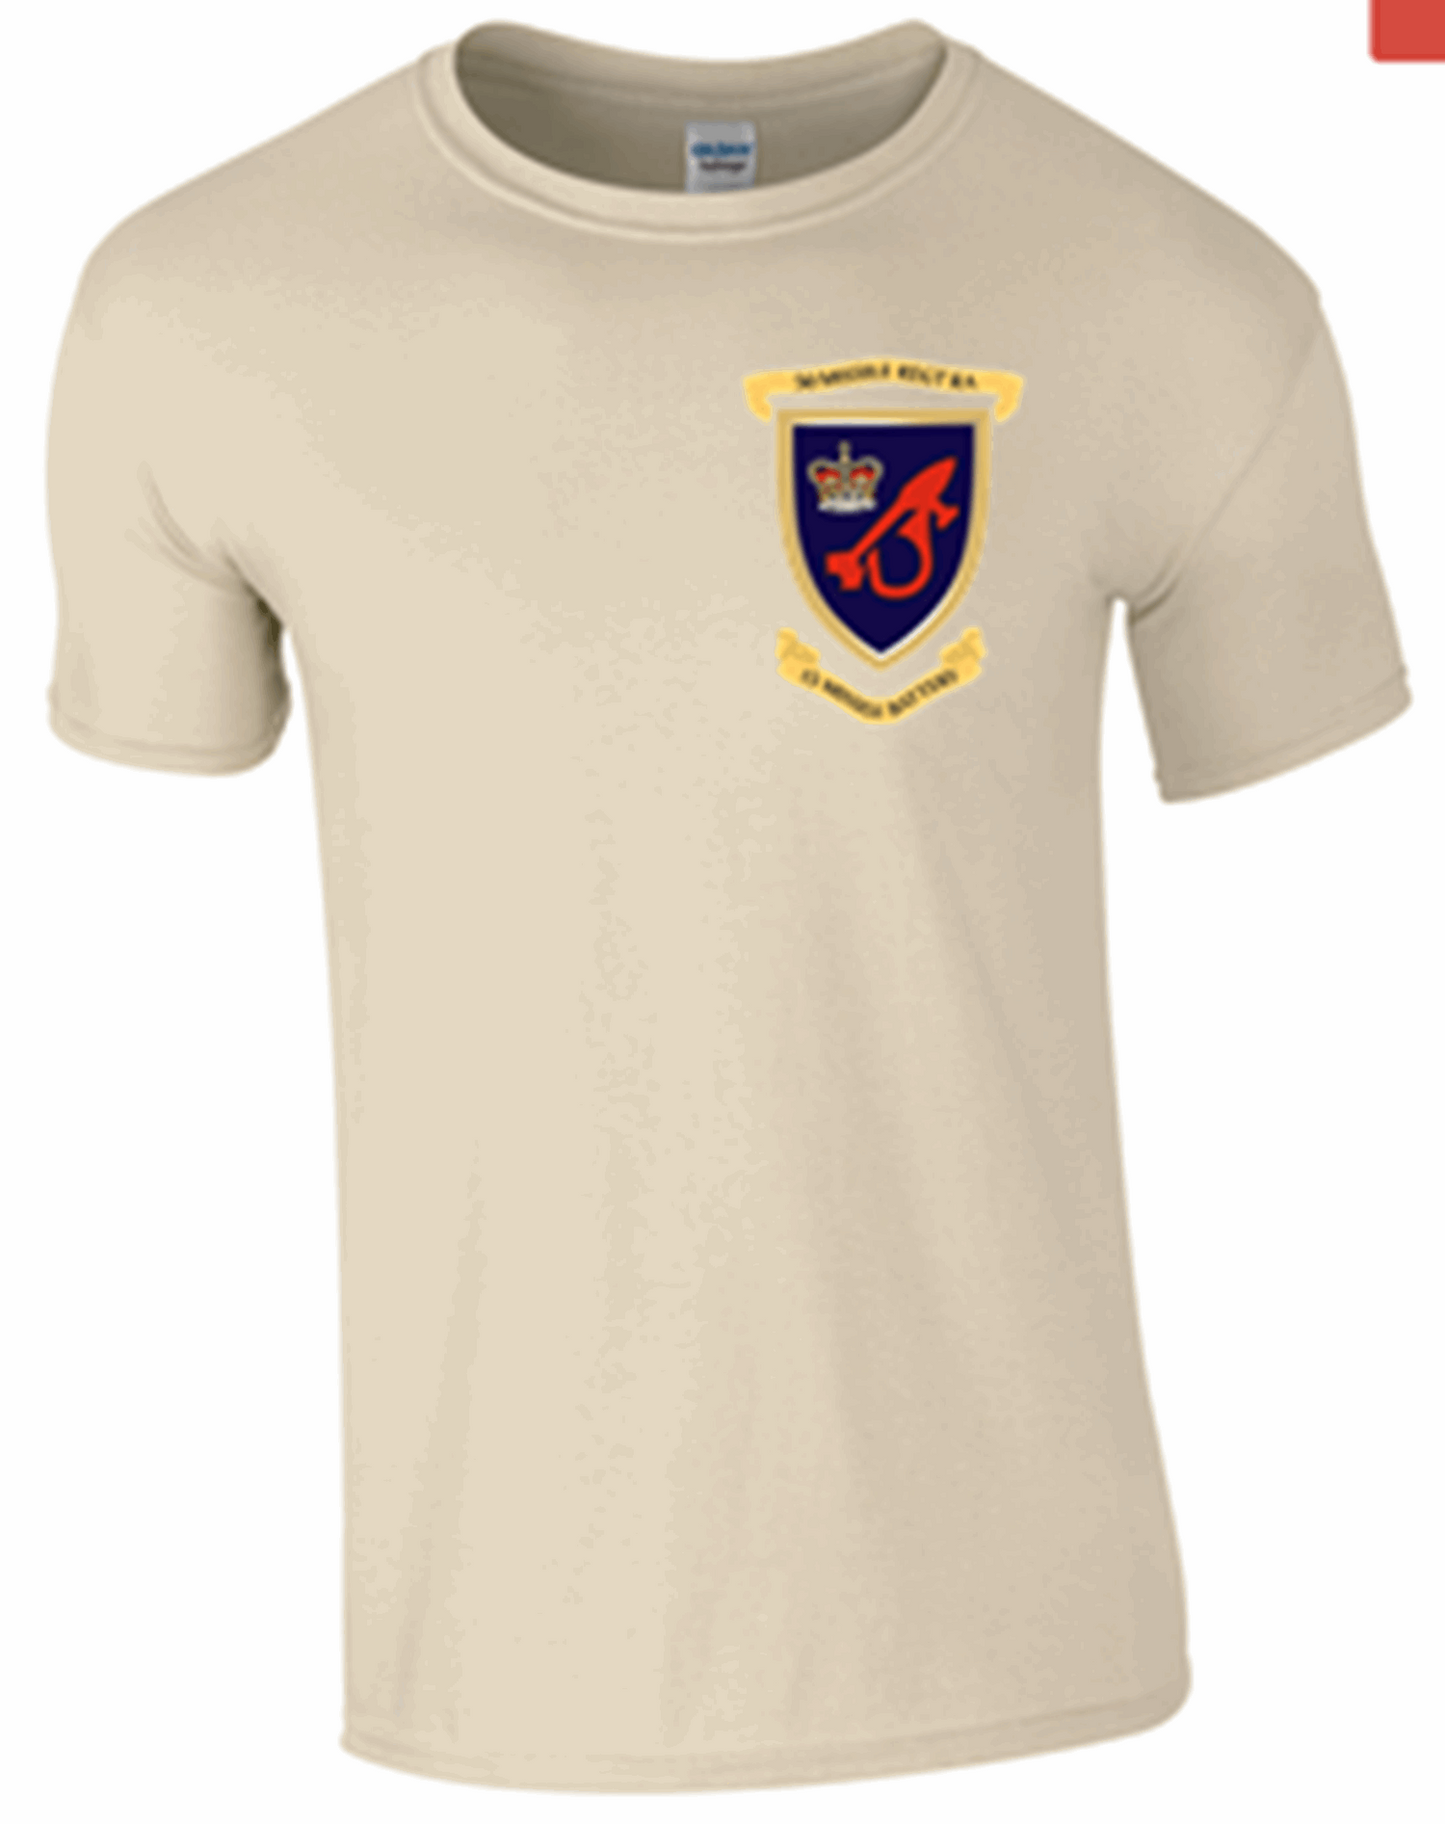 15 Missile Battery T-Shirt RA Front Only - Army 1157 kit S / SAND Army 1157 Kit Veterans Owned Business